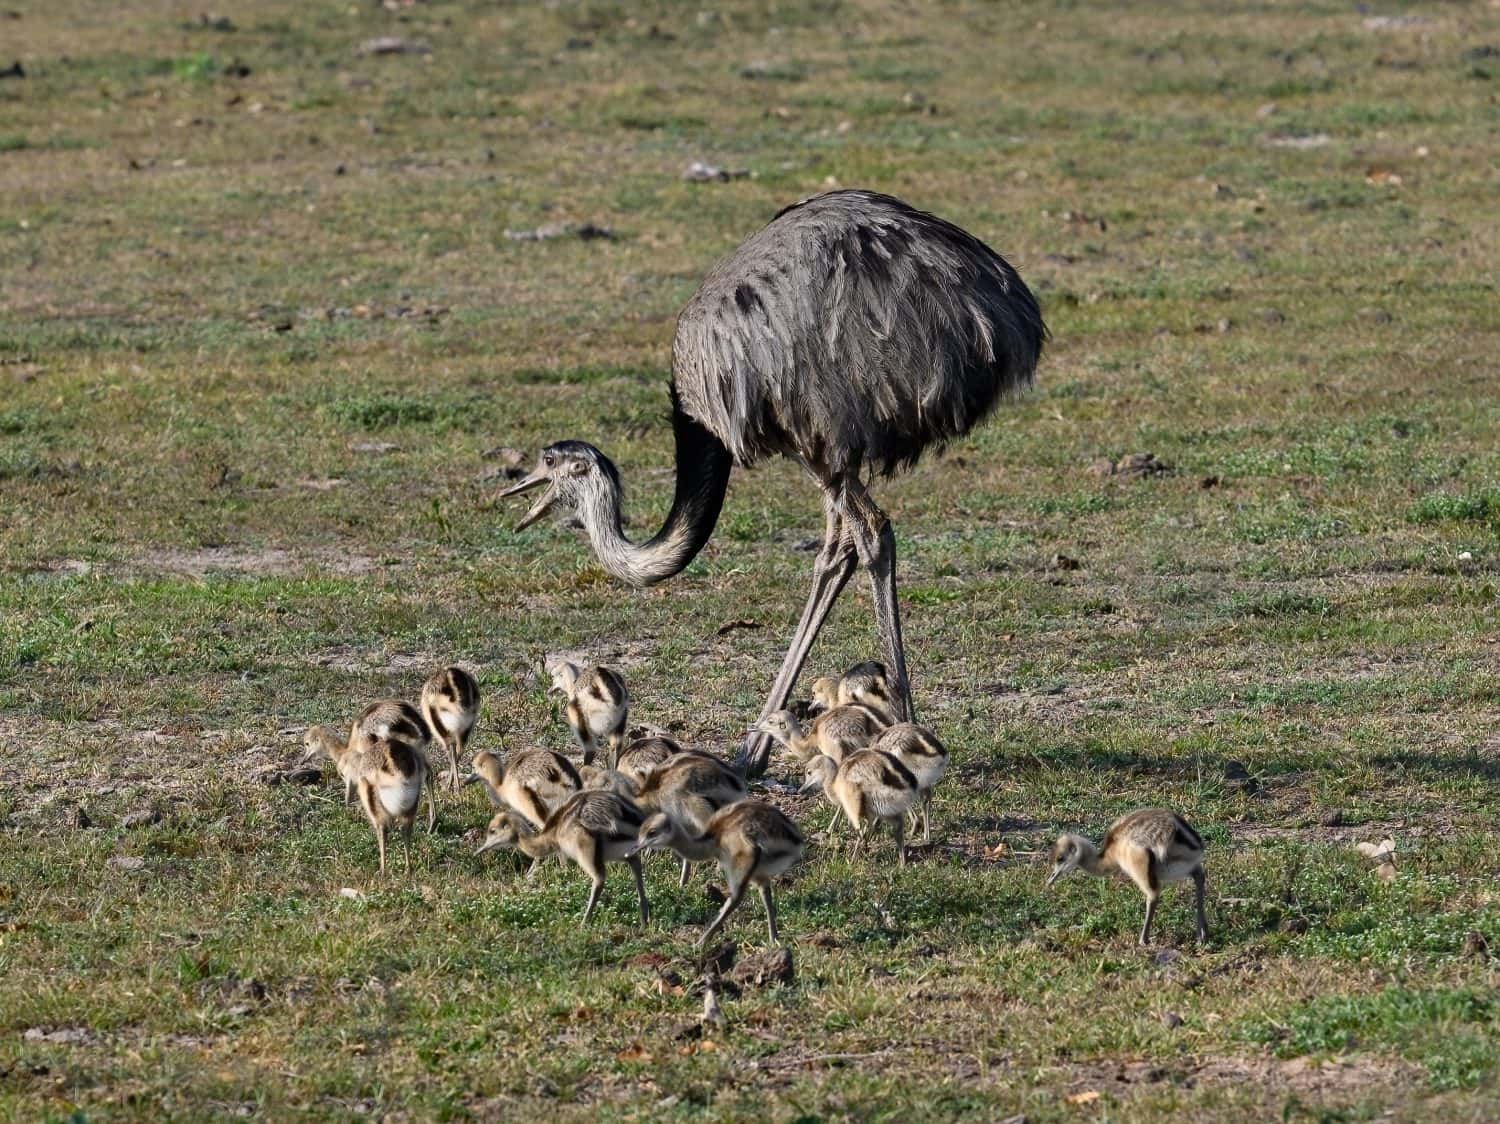 Greater Rhea with chicks foraging in savannah of Pantanal, Brazil